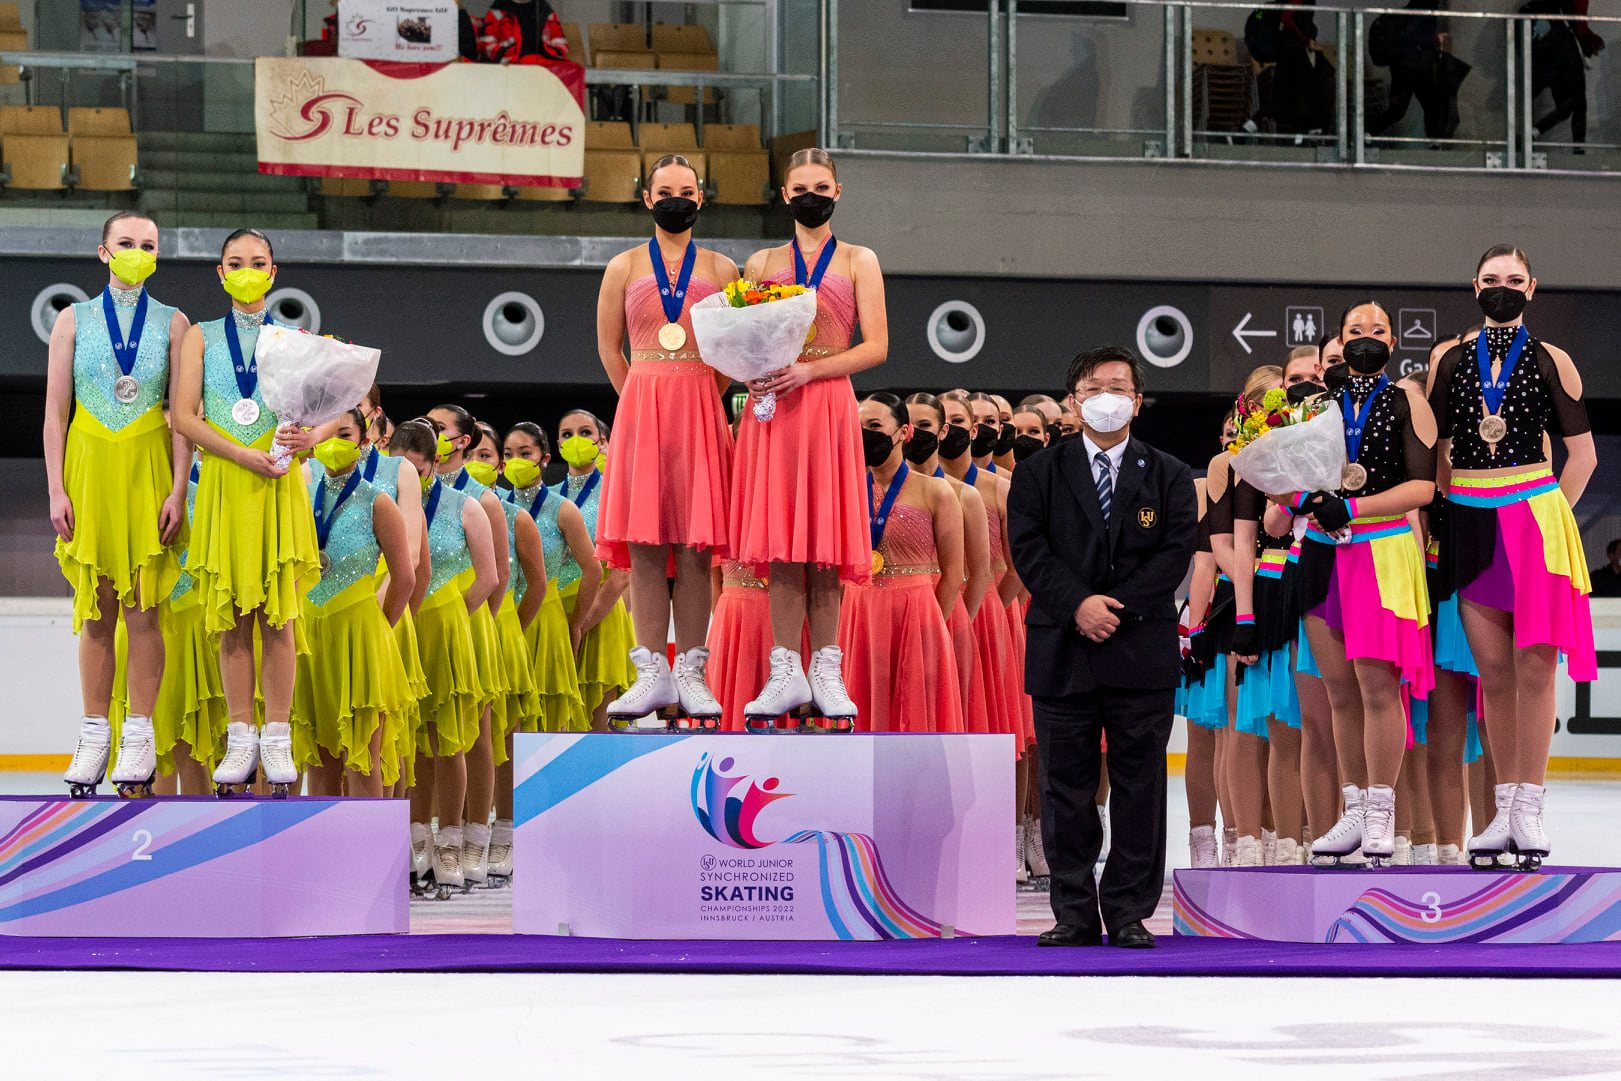 Team Fintastic Junior topped the standings to retain their title at the World Junior Synchronized Skating Championships in Innsbruck ©U.S. Figure Skating